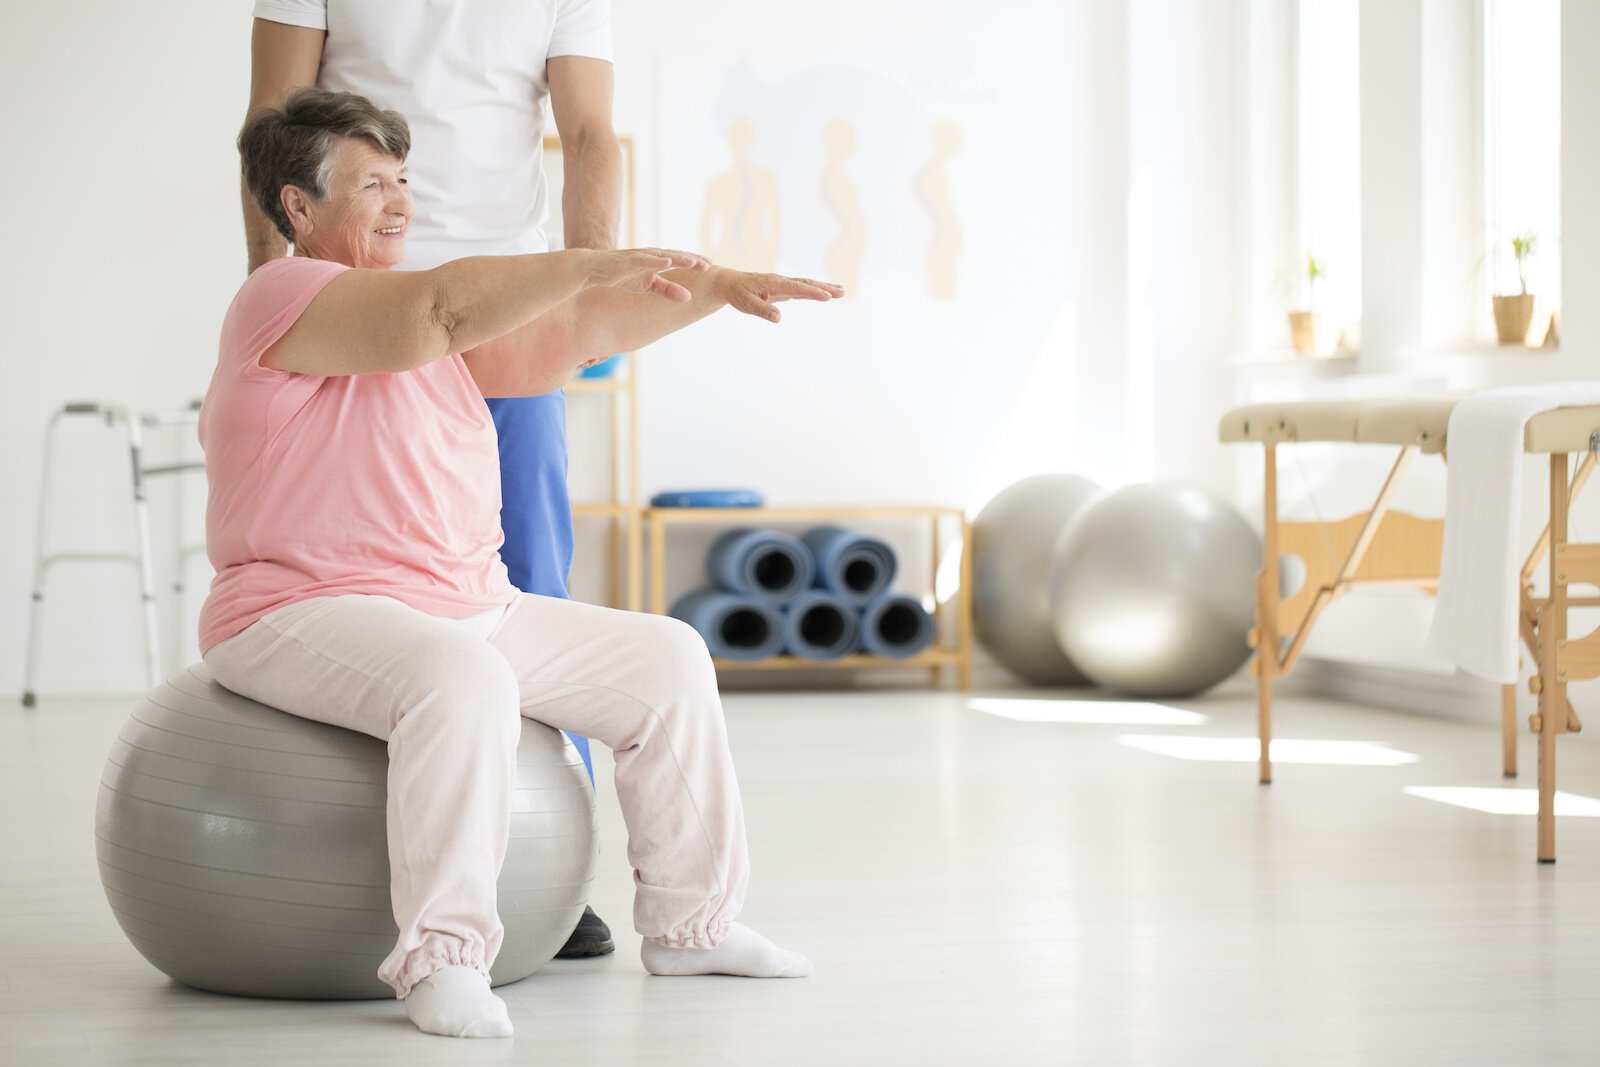 A Guide To The Best Exercises For Older People